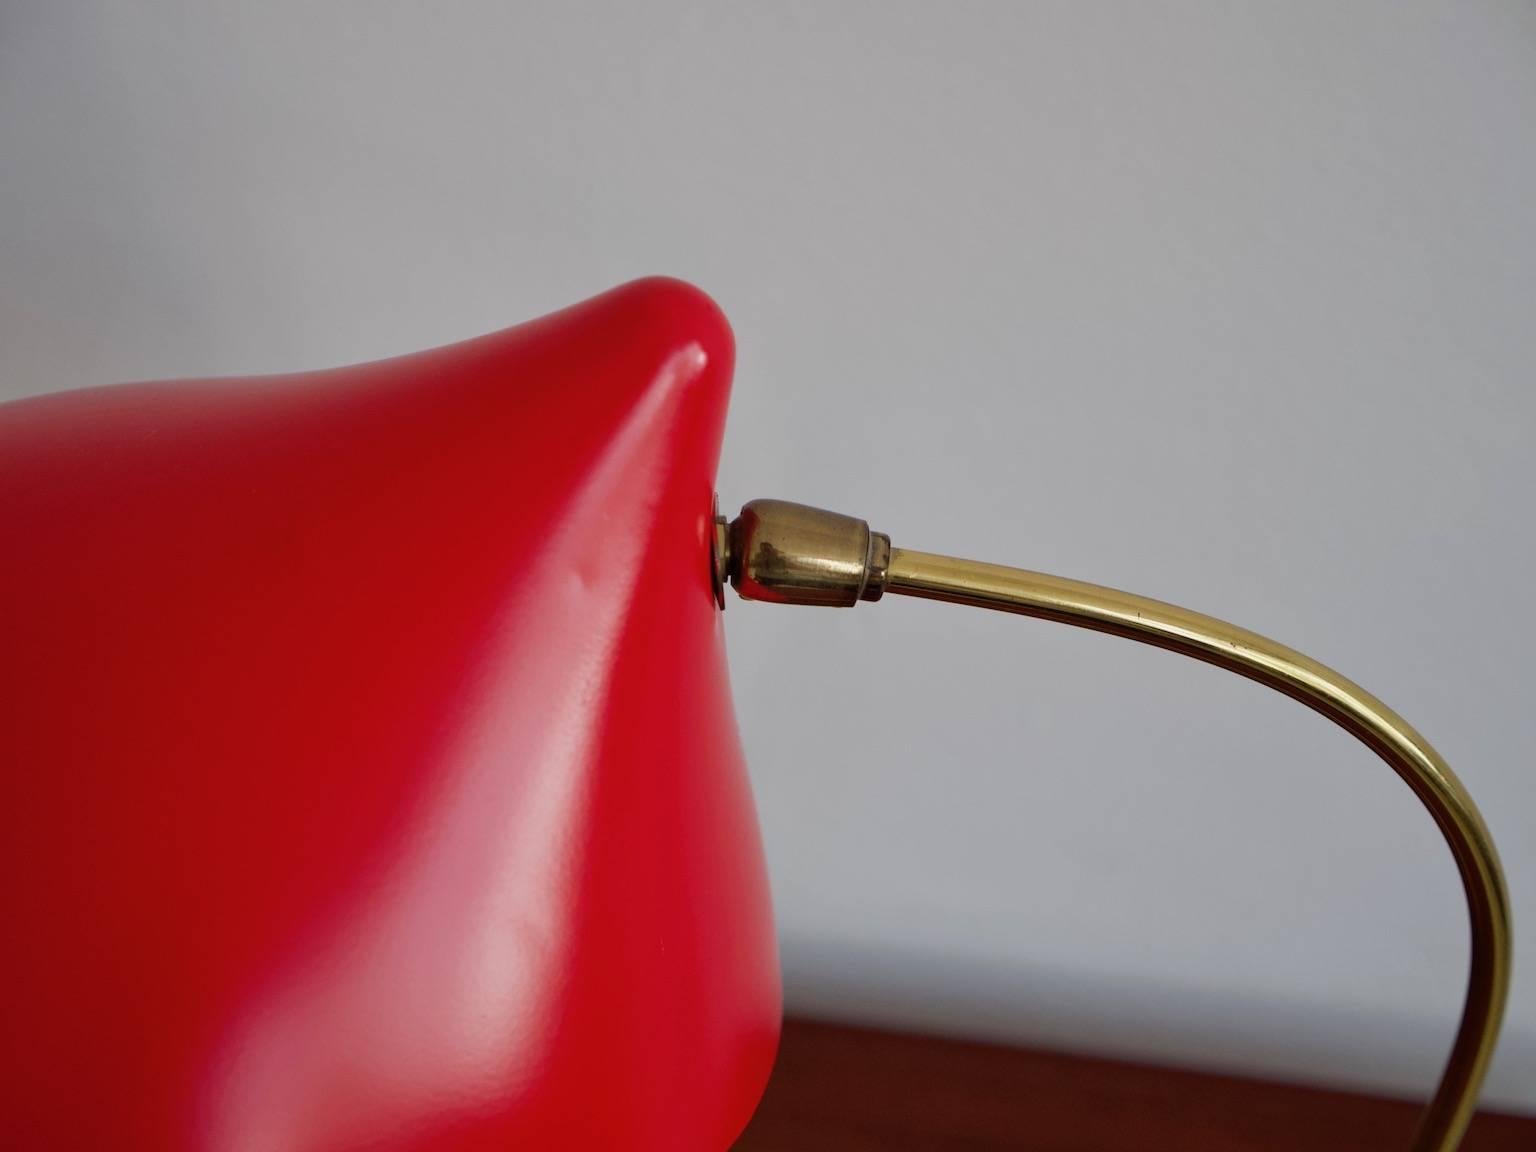 Red table lamp with crowfoot by Louis Kalff for Philips from the 1950s. Three-beam metal foot with cream white shrink lacquer finish, brass tube rod and adjustable, recently re-lacquered red shade with cream white on the inside. Slight traces of